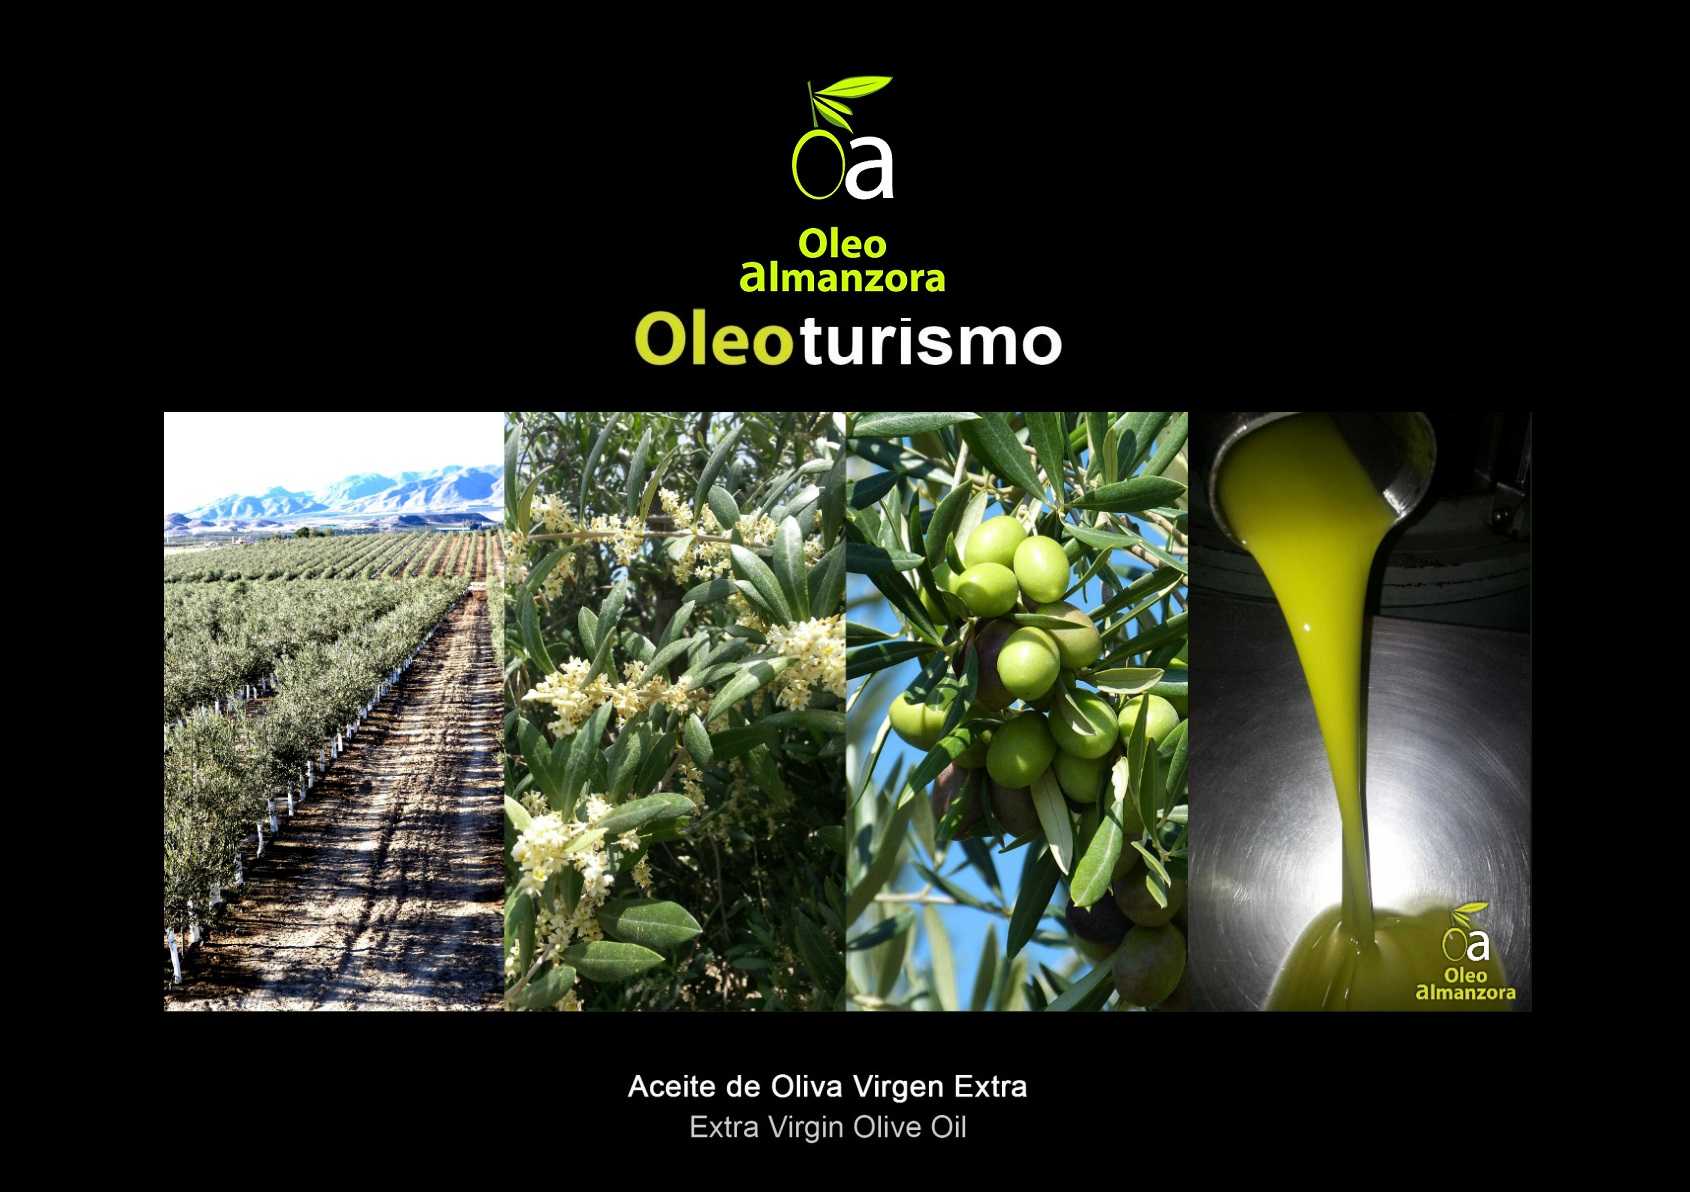 Olive-oil tourism in Pulpí: Guided tour with tasting and EVOO tasting masterclass